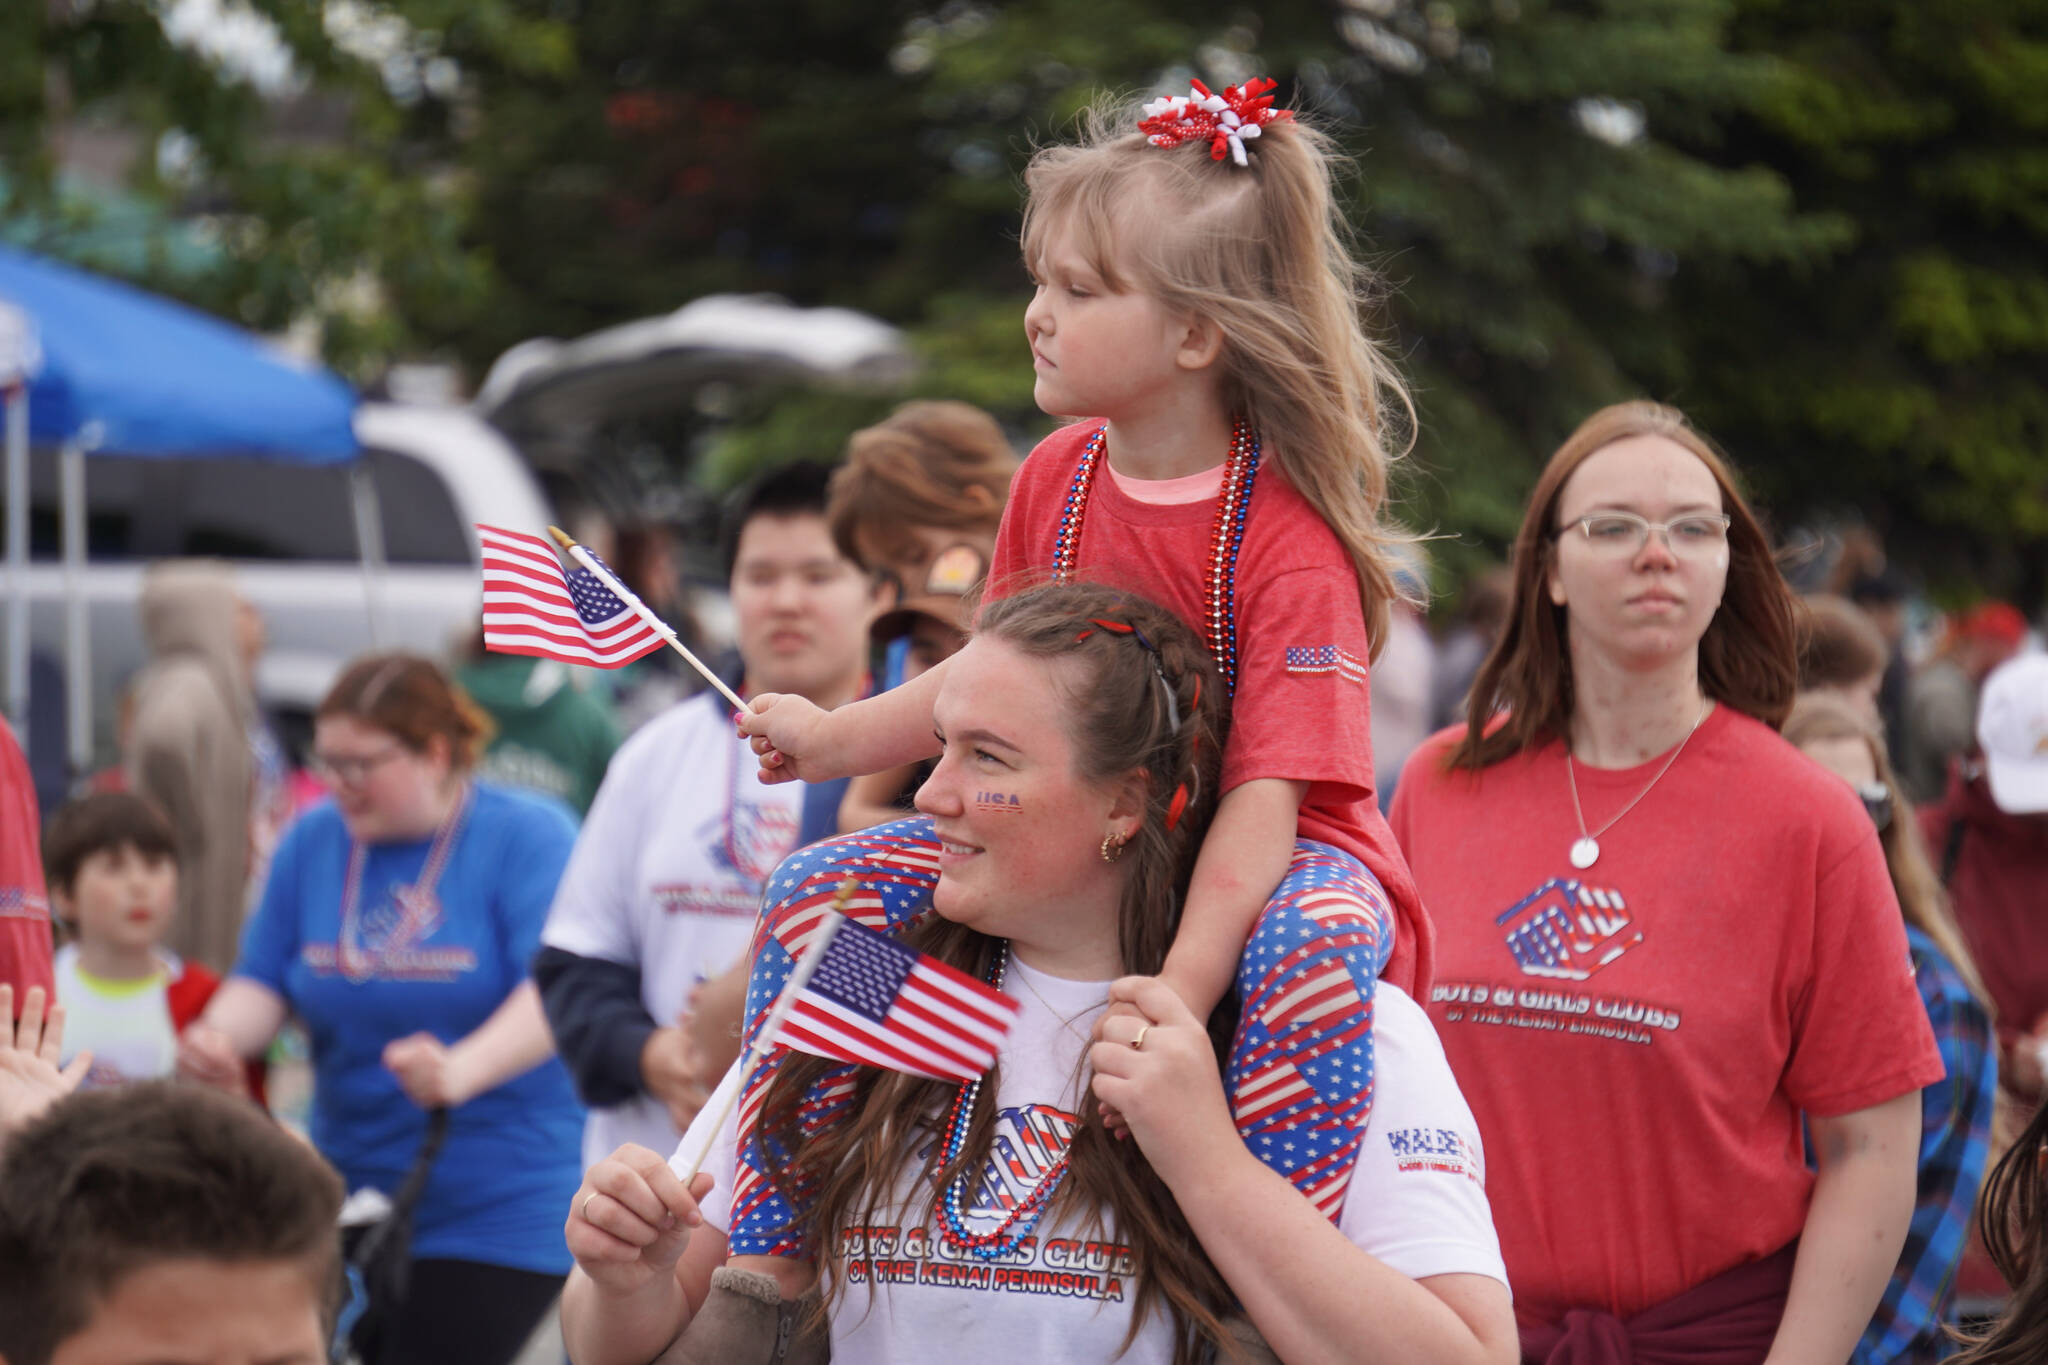 The Boys & Girls Clubs of the Kenai Peninsula smile and wave as the Fourth of July Parade moves down the Kenai Spur Highway in Kenai, Alaska on Tuesday, July 4, 2023. (Jake Dye/Peninsula Clarion)